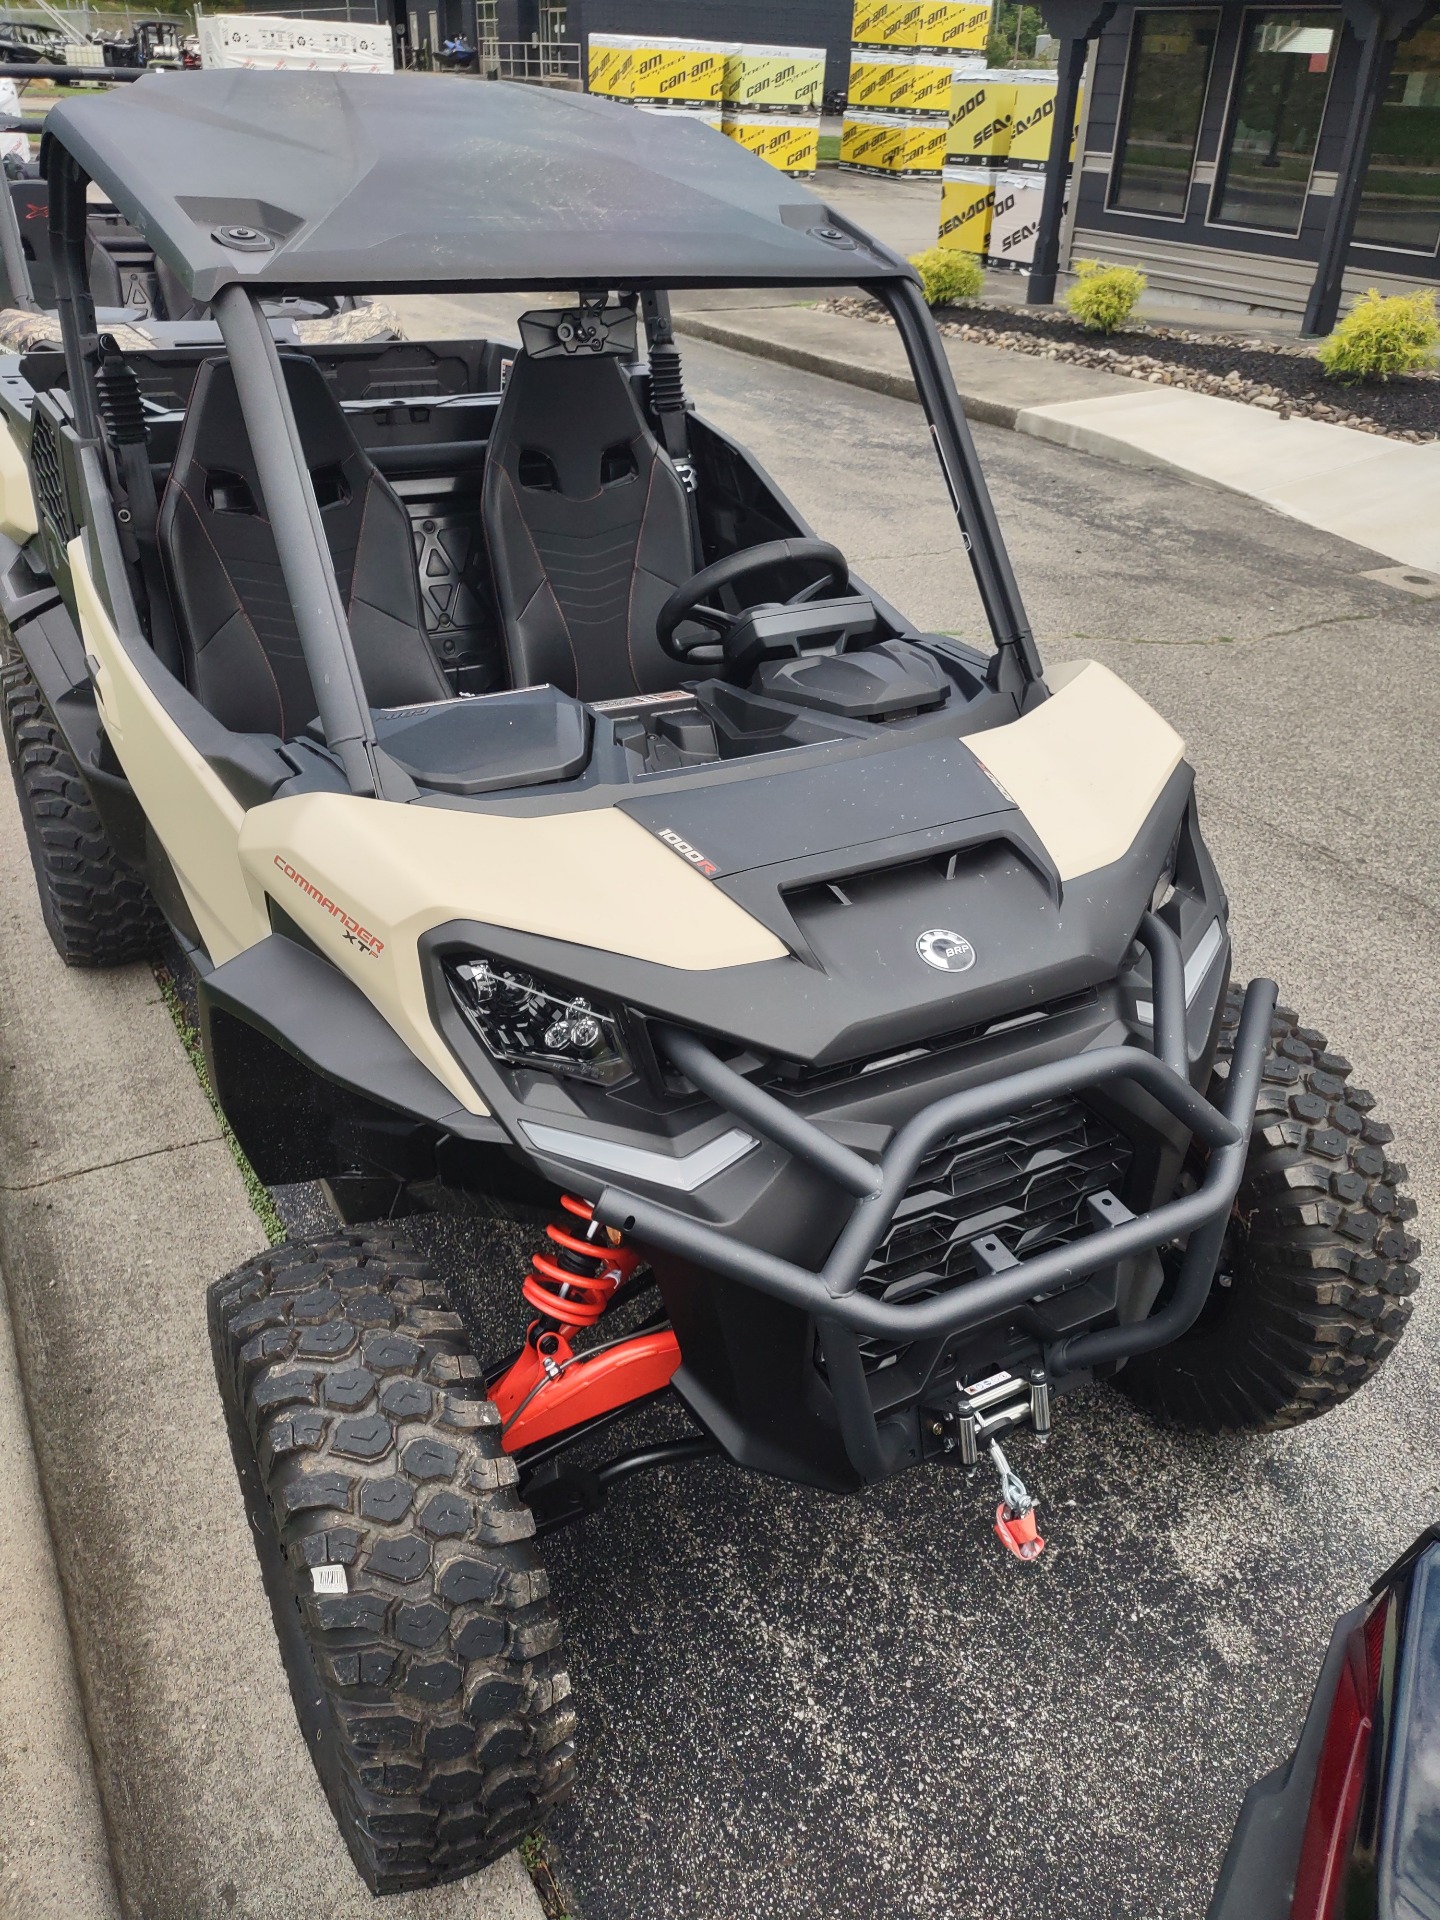 2023 Can-Am Commander XT-P 1000R in Barboursville, West Virginia - Photo 8